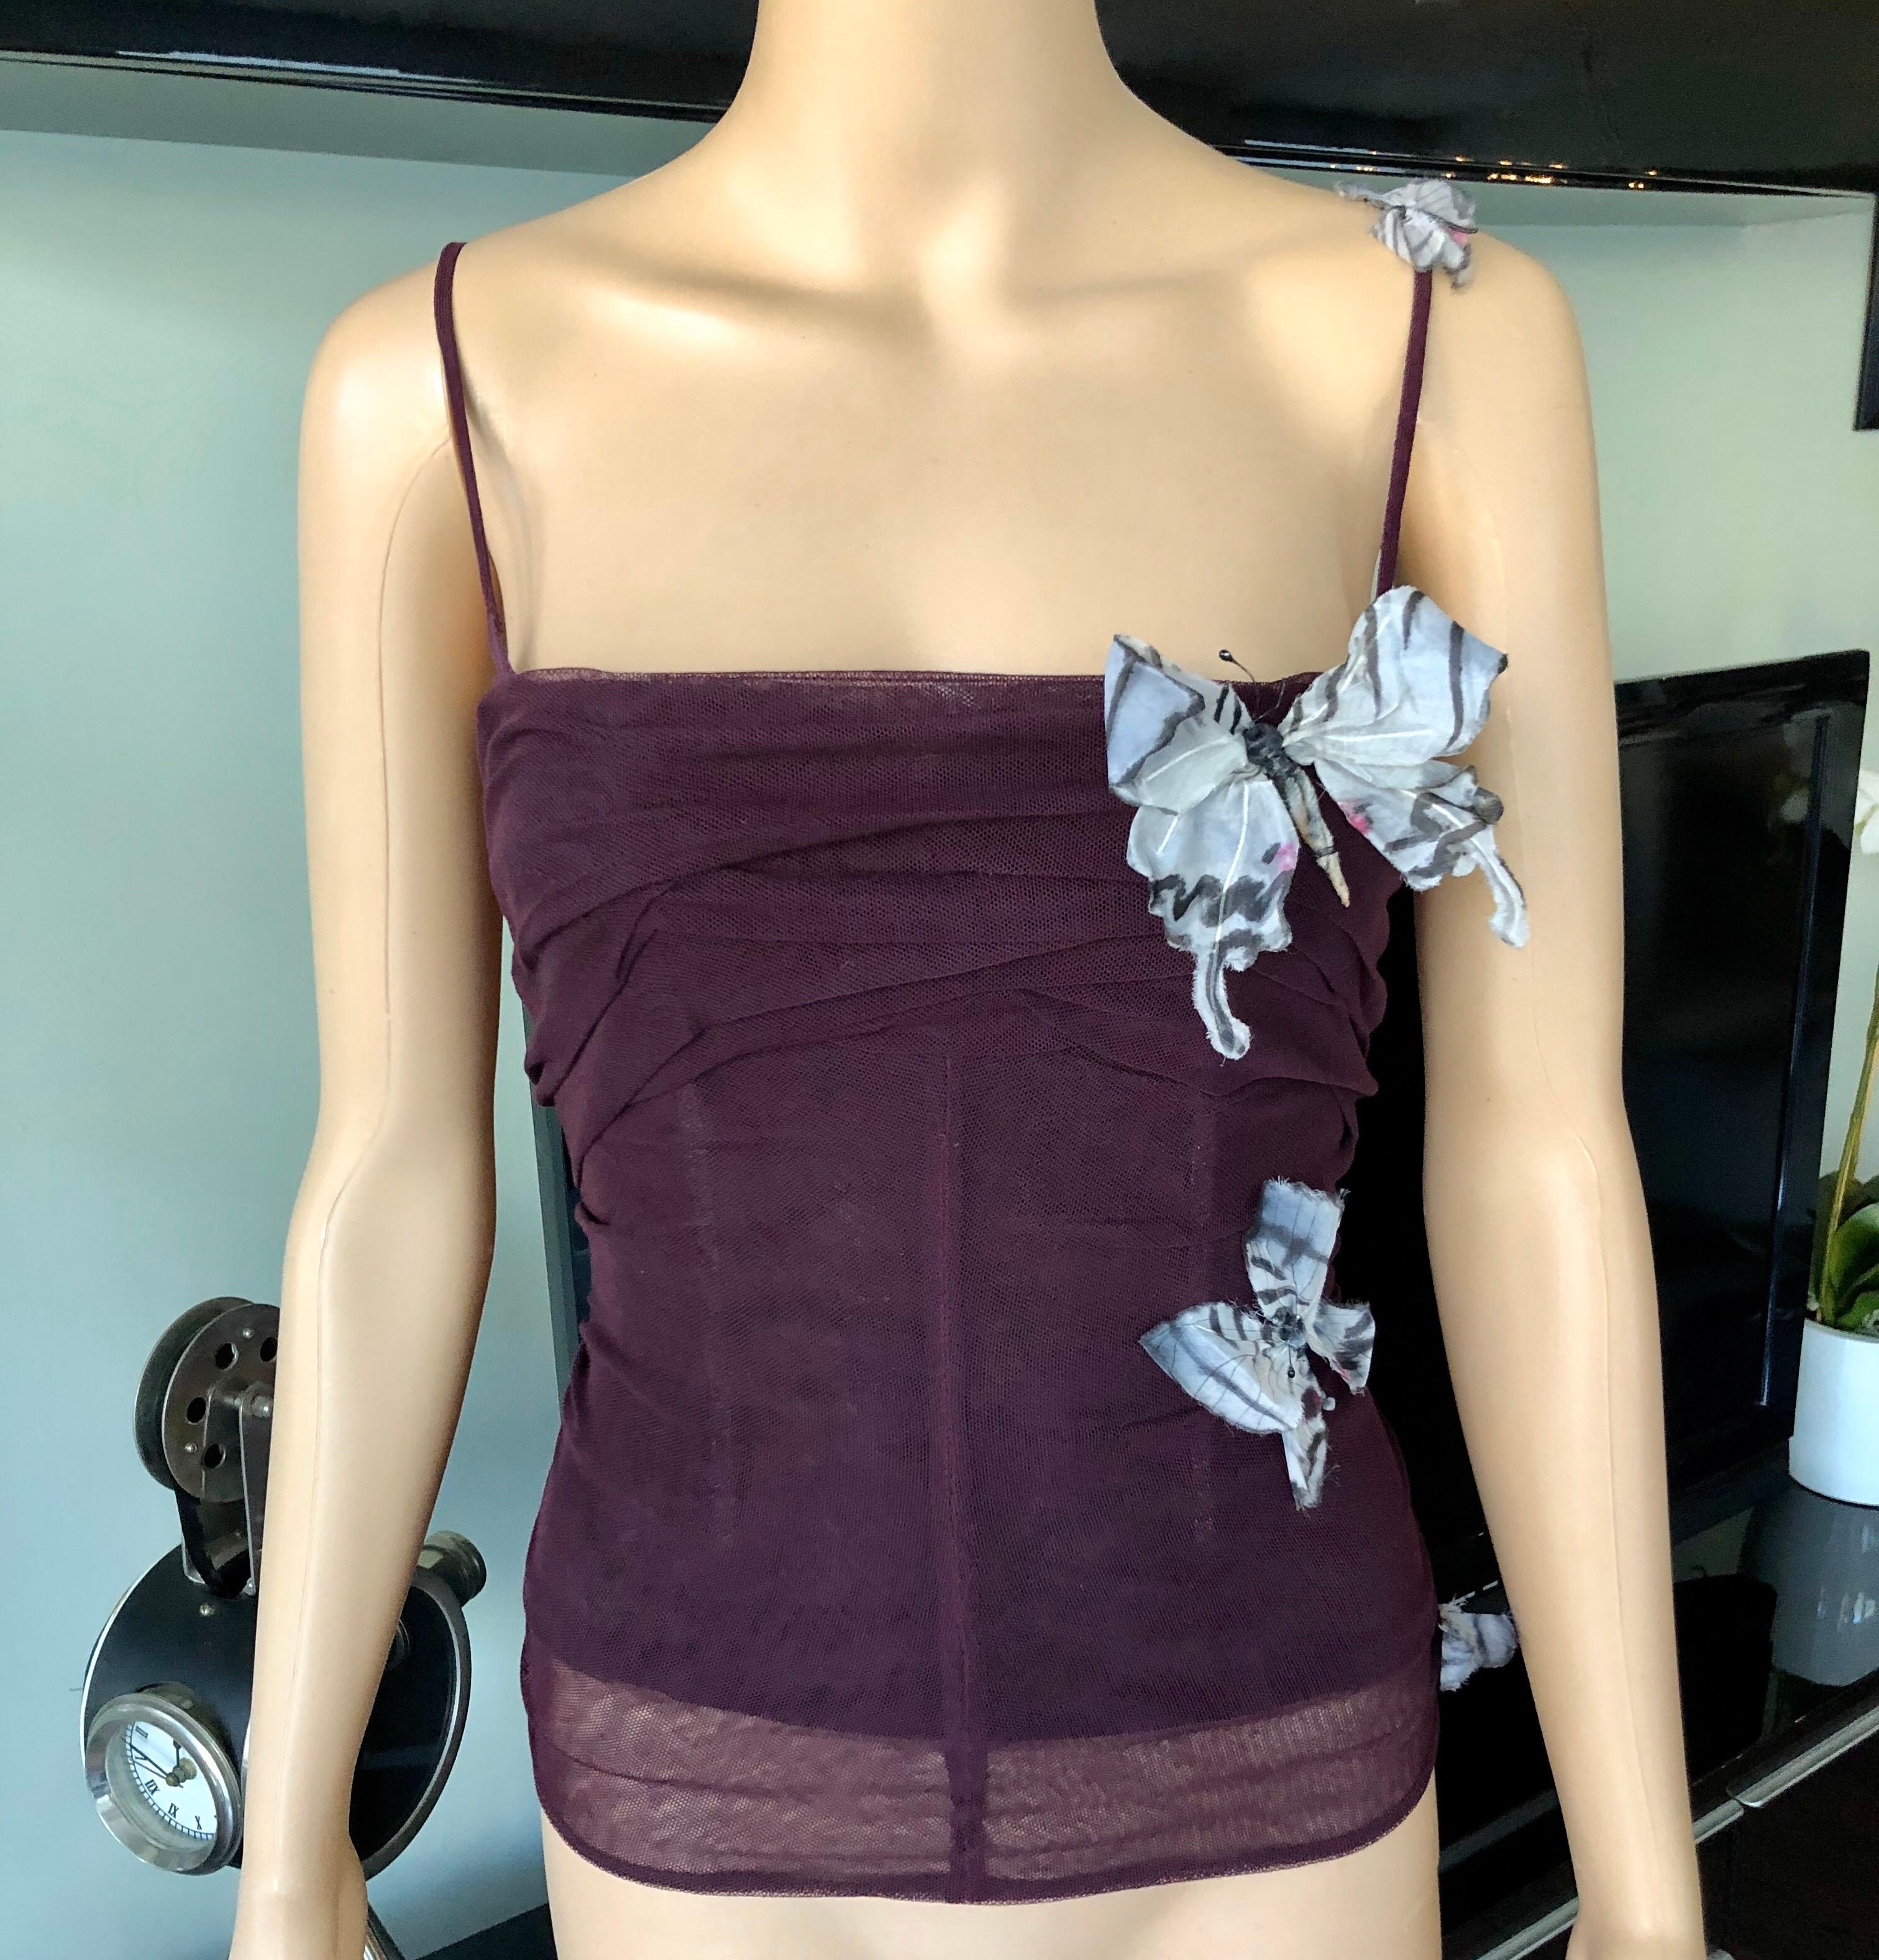 Dolce & Gabbana S/S 1998 Vintage Stromboli Collection Butterfly Top

Dolce & Gabbana sleeveless top with butterfly applique throughout and expsoed zip closure at back. Please note the size tag has been removed. Please find below the approximate